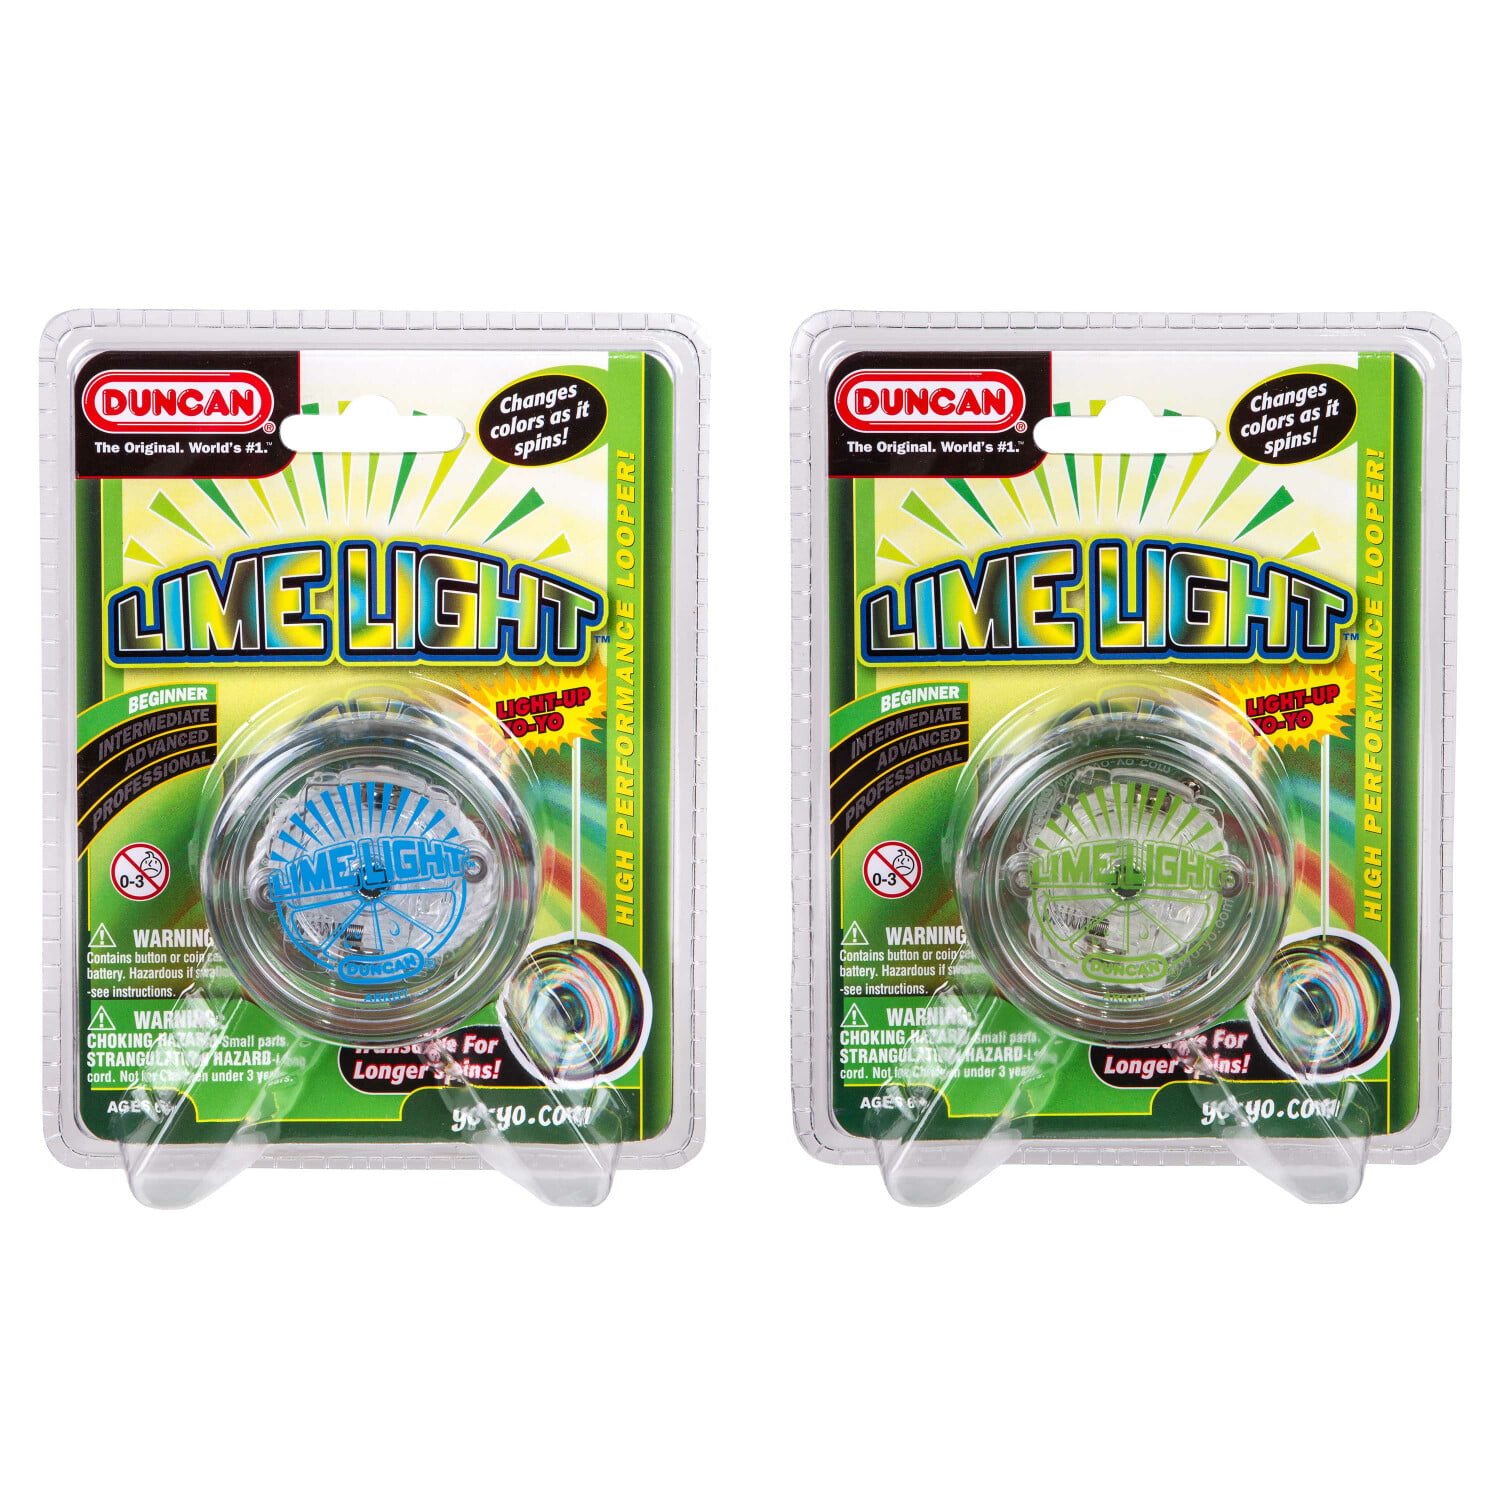 Colors Vary YoYoFactory Spin Top Accessories String and Button Kit 